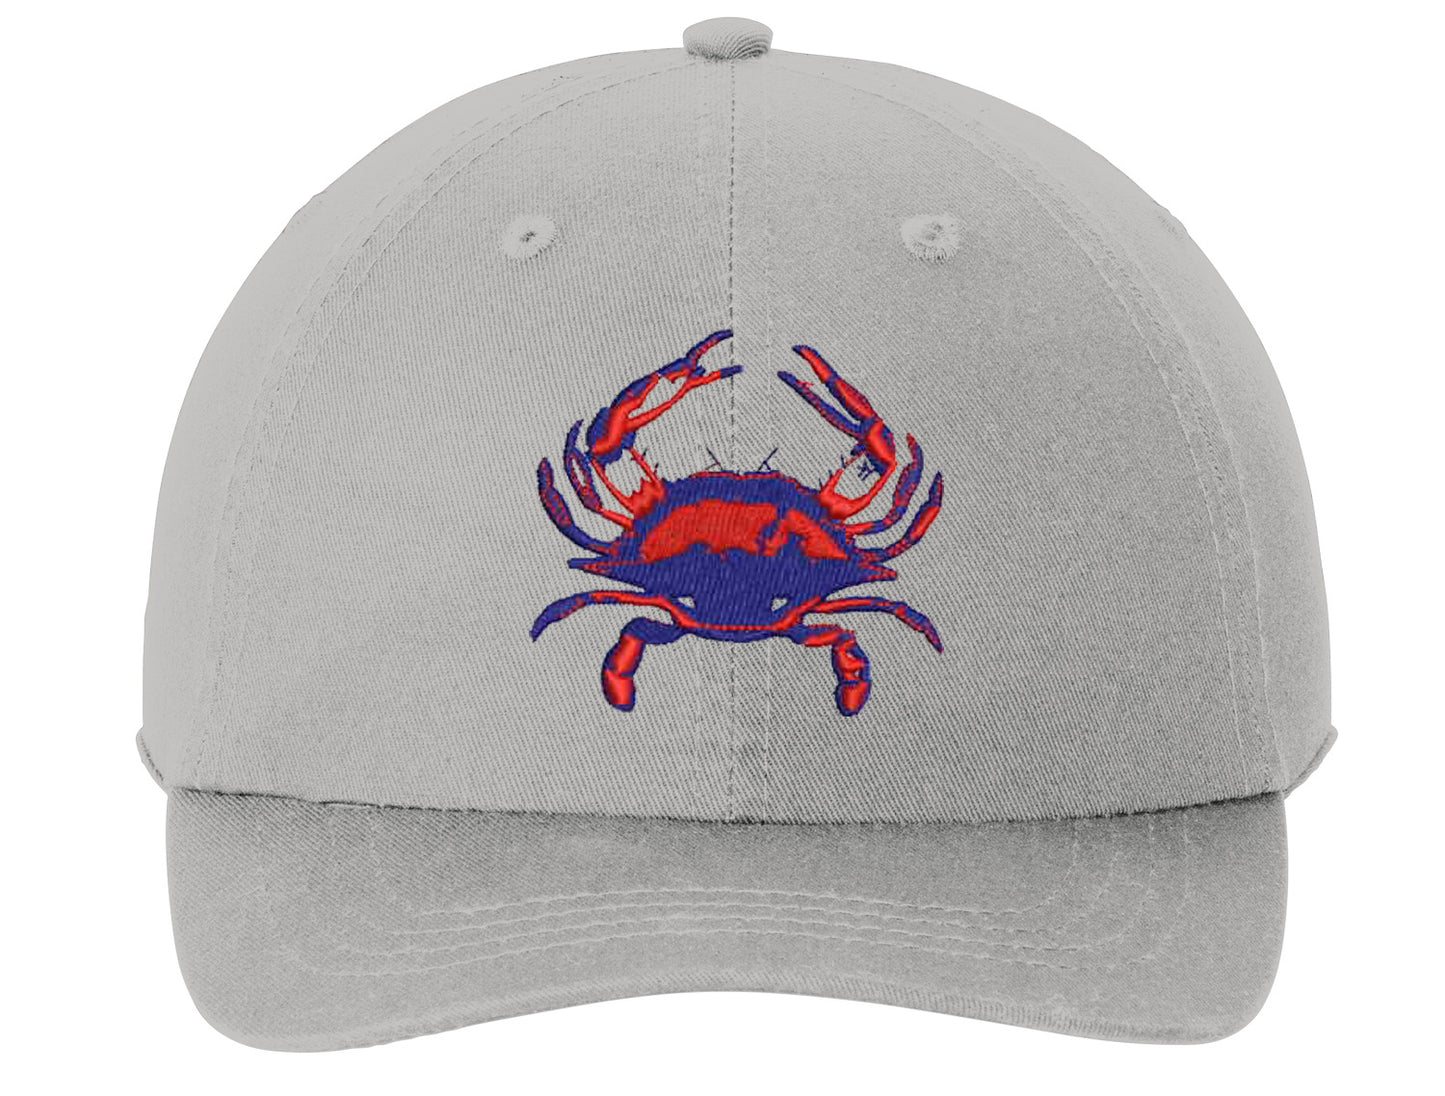 Blue Crab Trucker Hats - Crab Dad Caps - Structured/Unstructured Hats - *9 Colors!